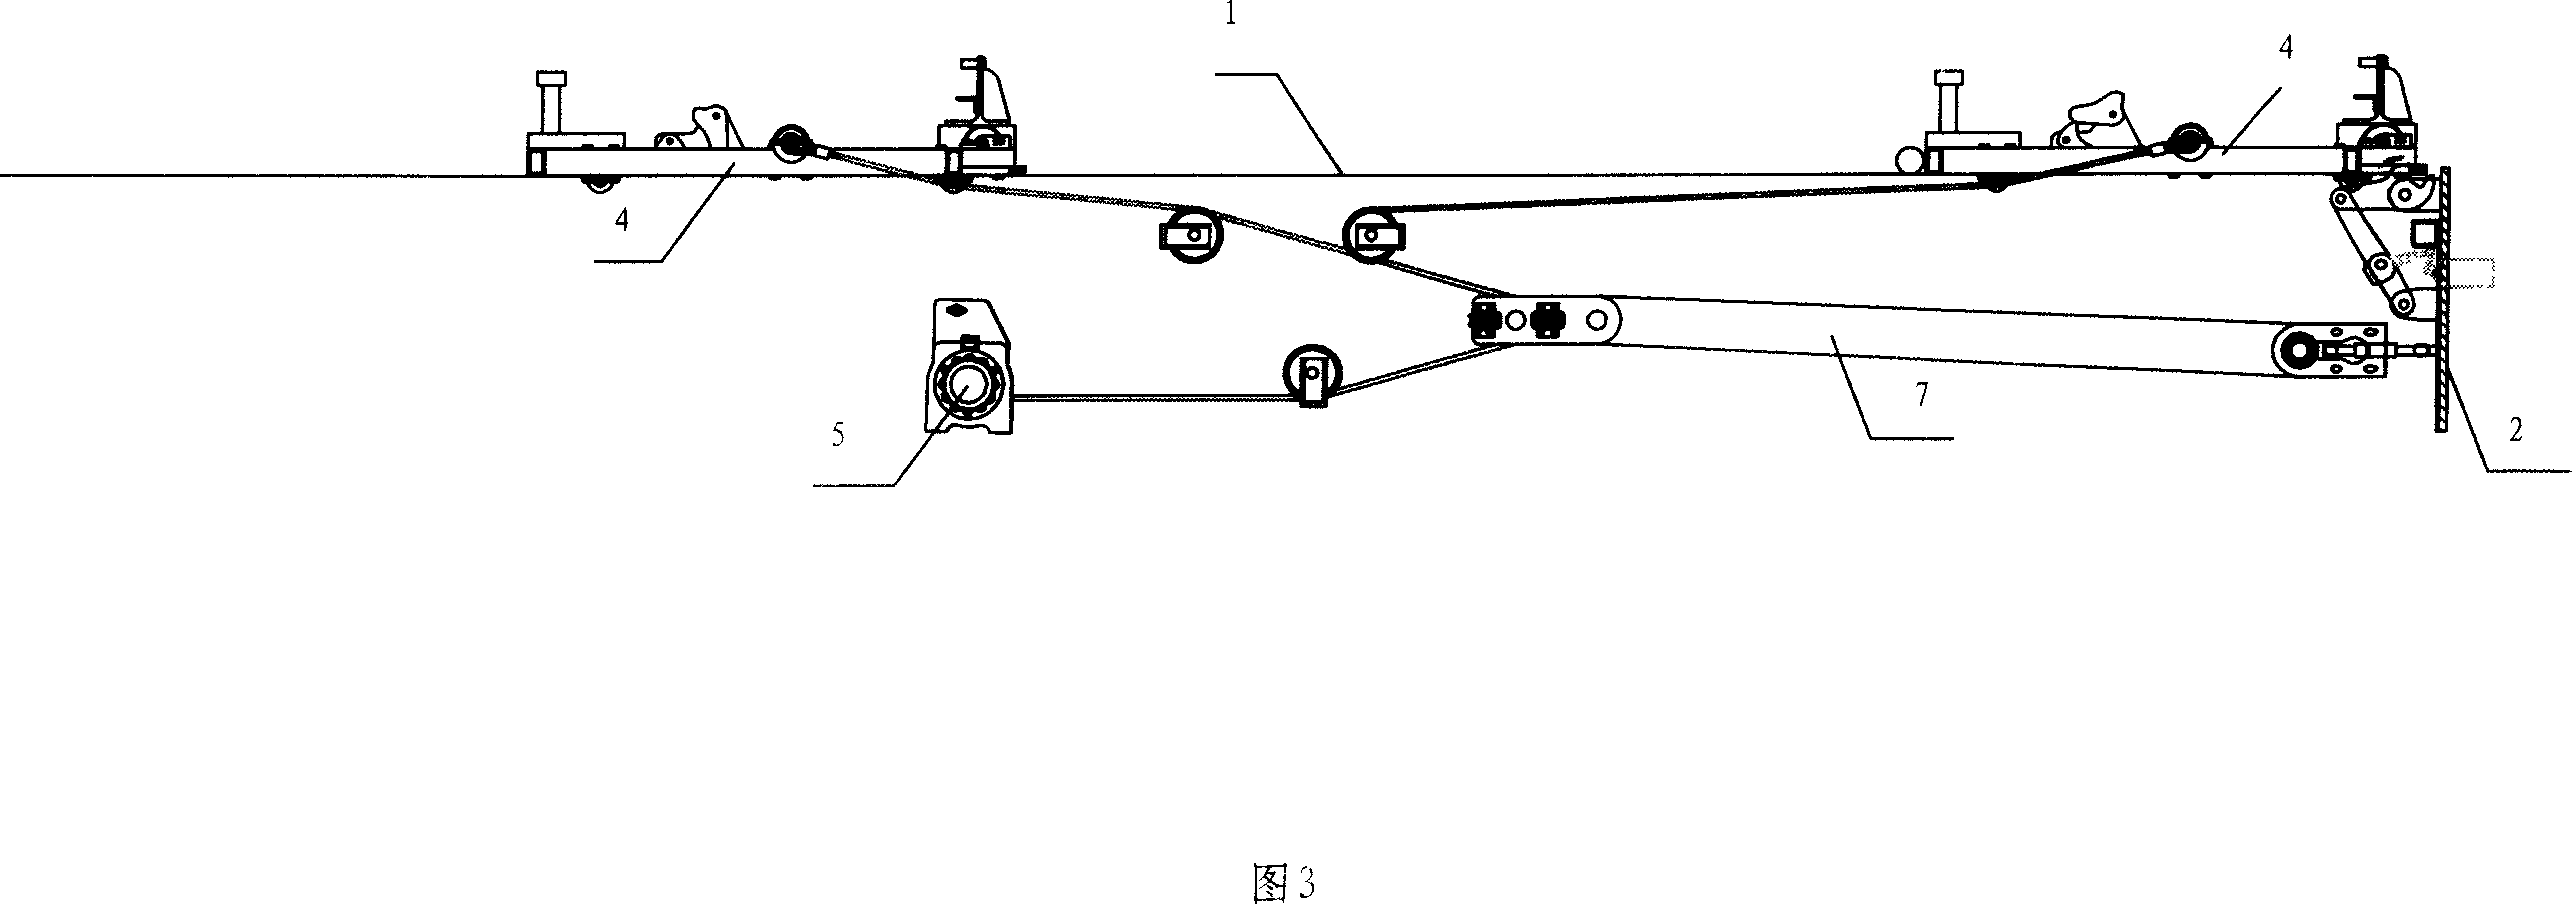 Unmanned aerial plane launching system and method